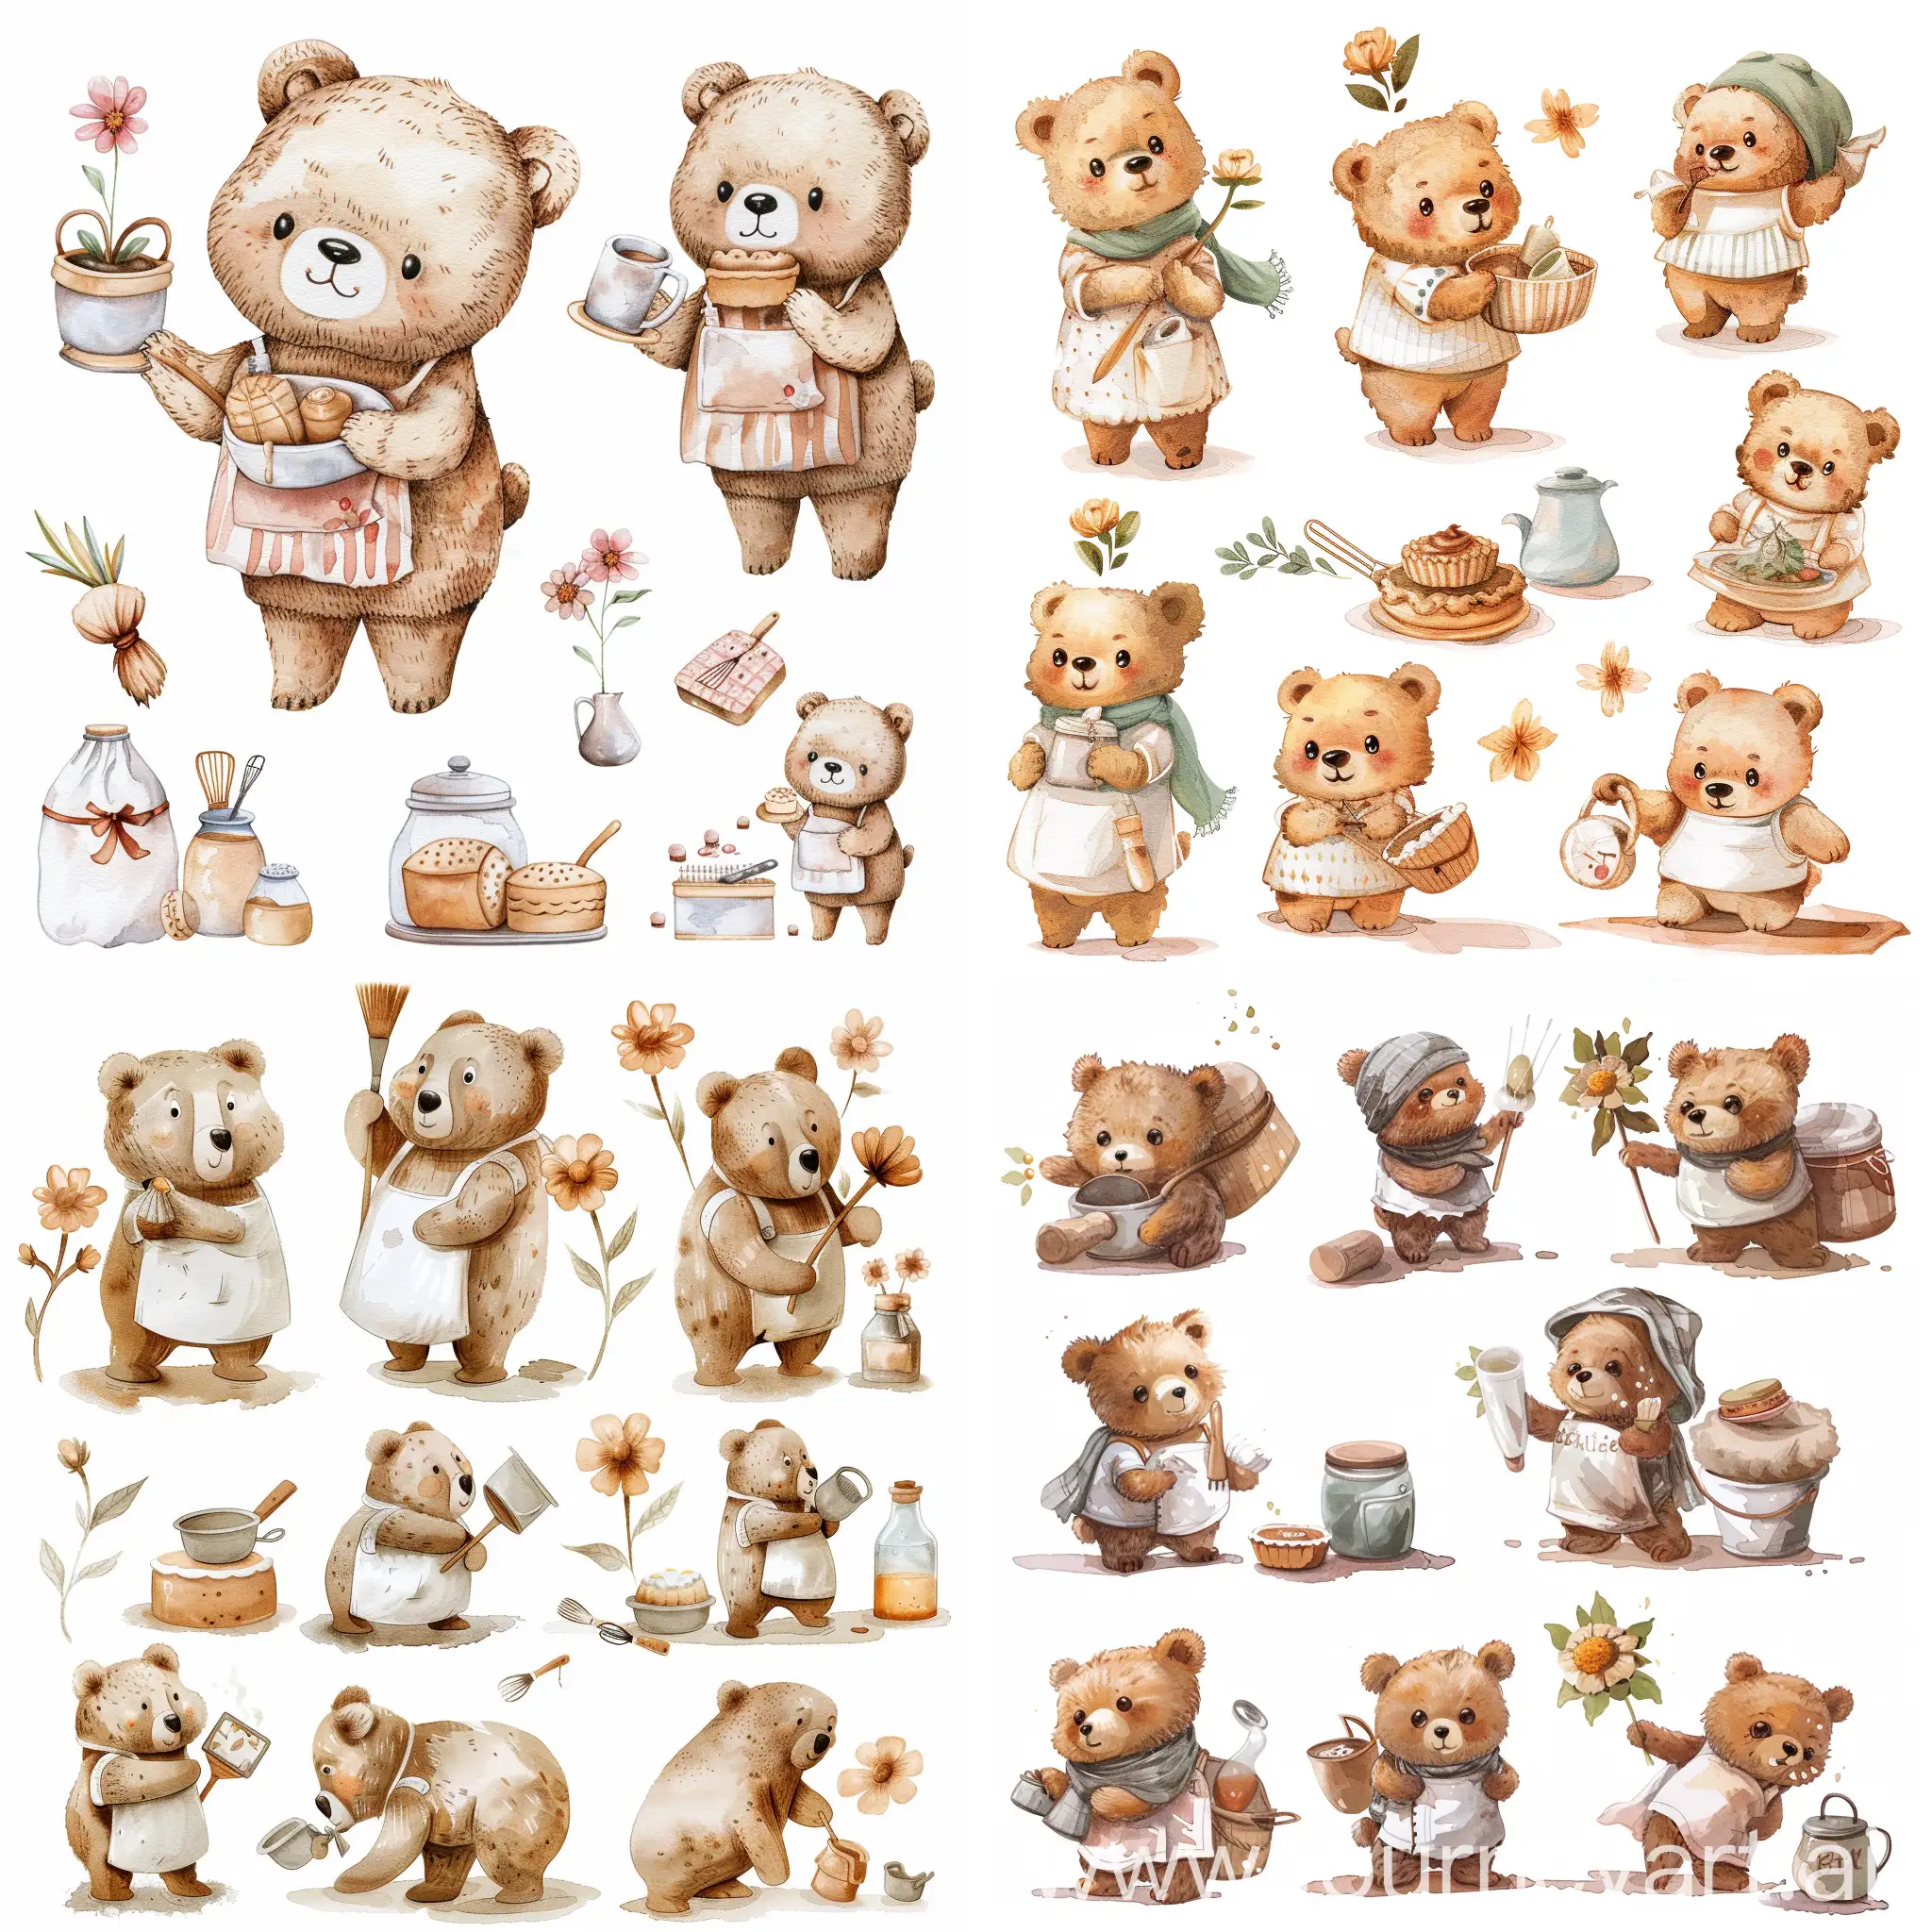 little chubby cute bear flower woollen texture character, Carrying other things baking stuff, multiple poses and expression, children book illustration, simple cute, watercolor illustration, collection, isolated on white background